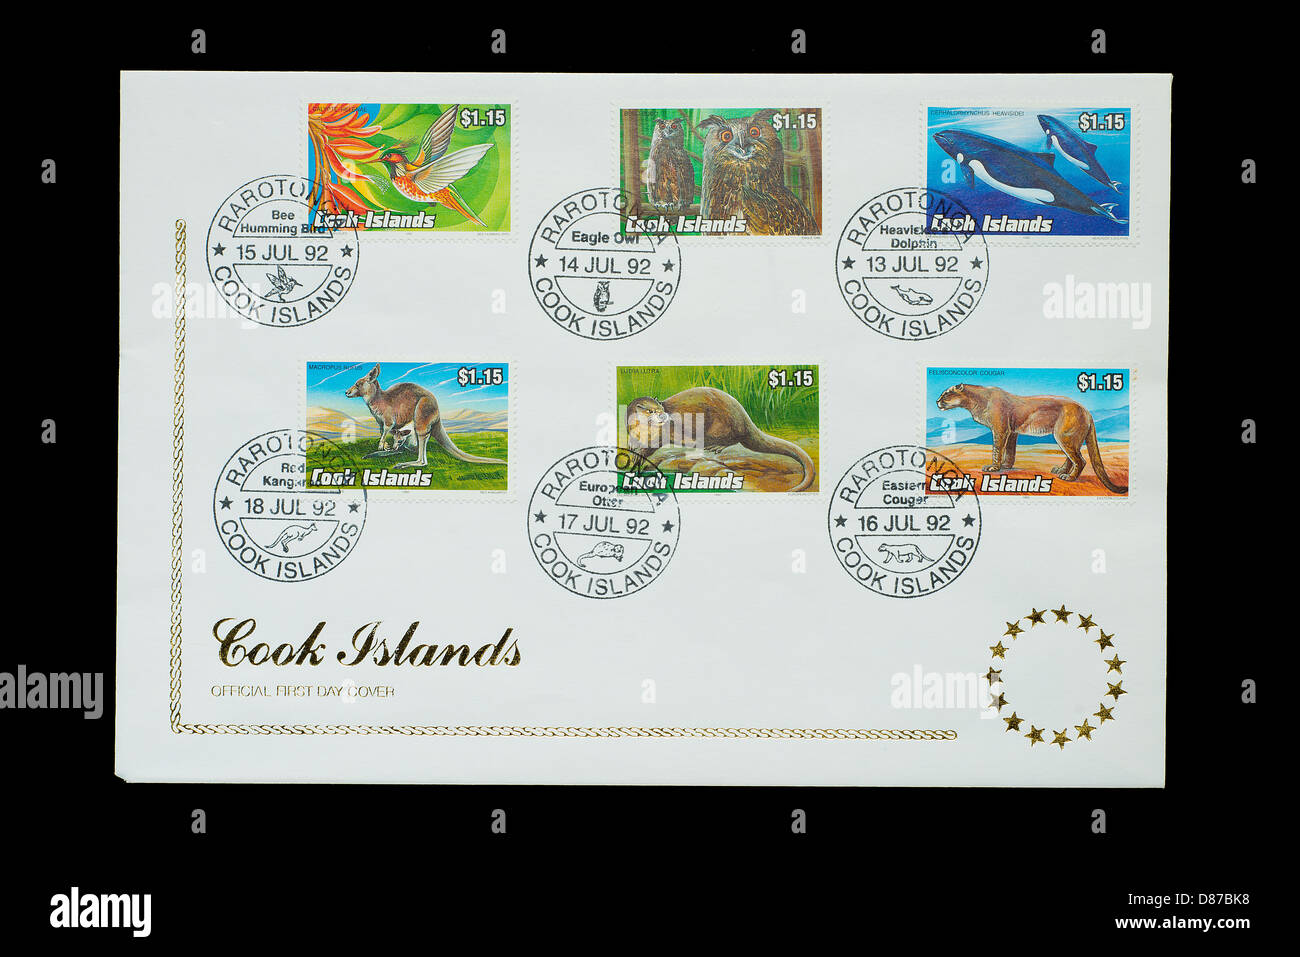 The official first day cover of stamps of Cook Islands Stock Photo